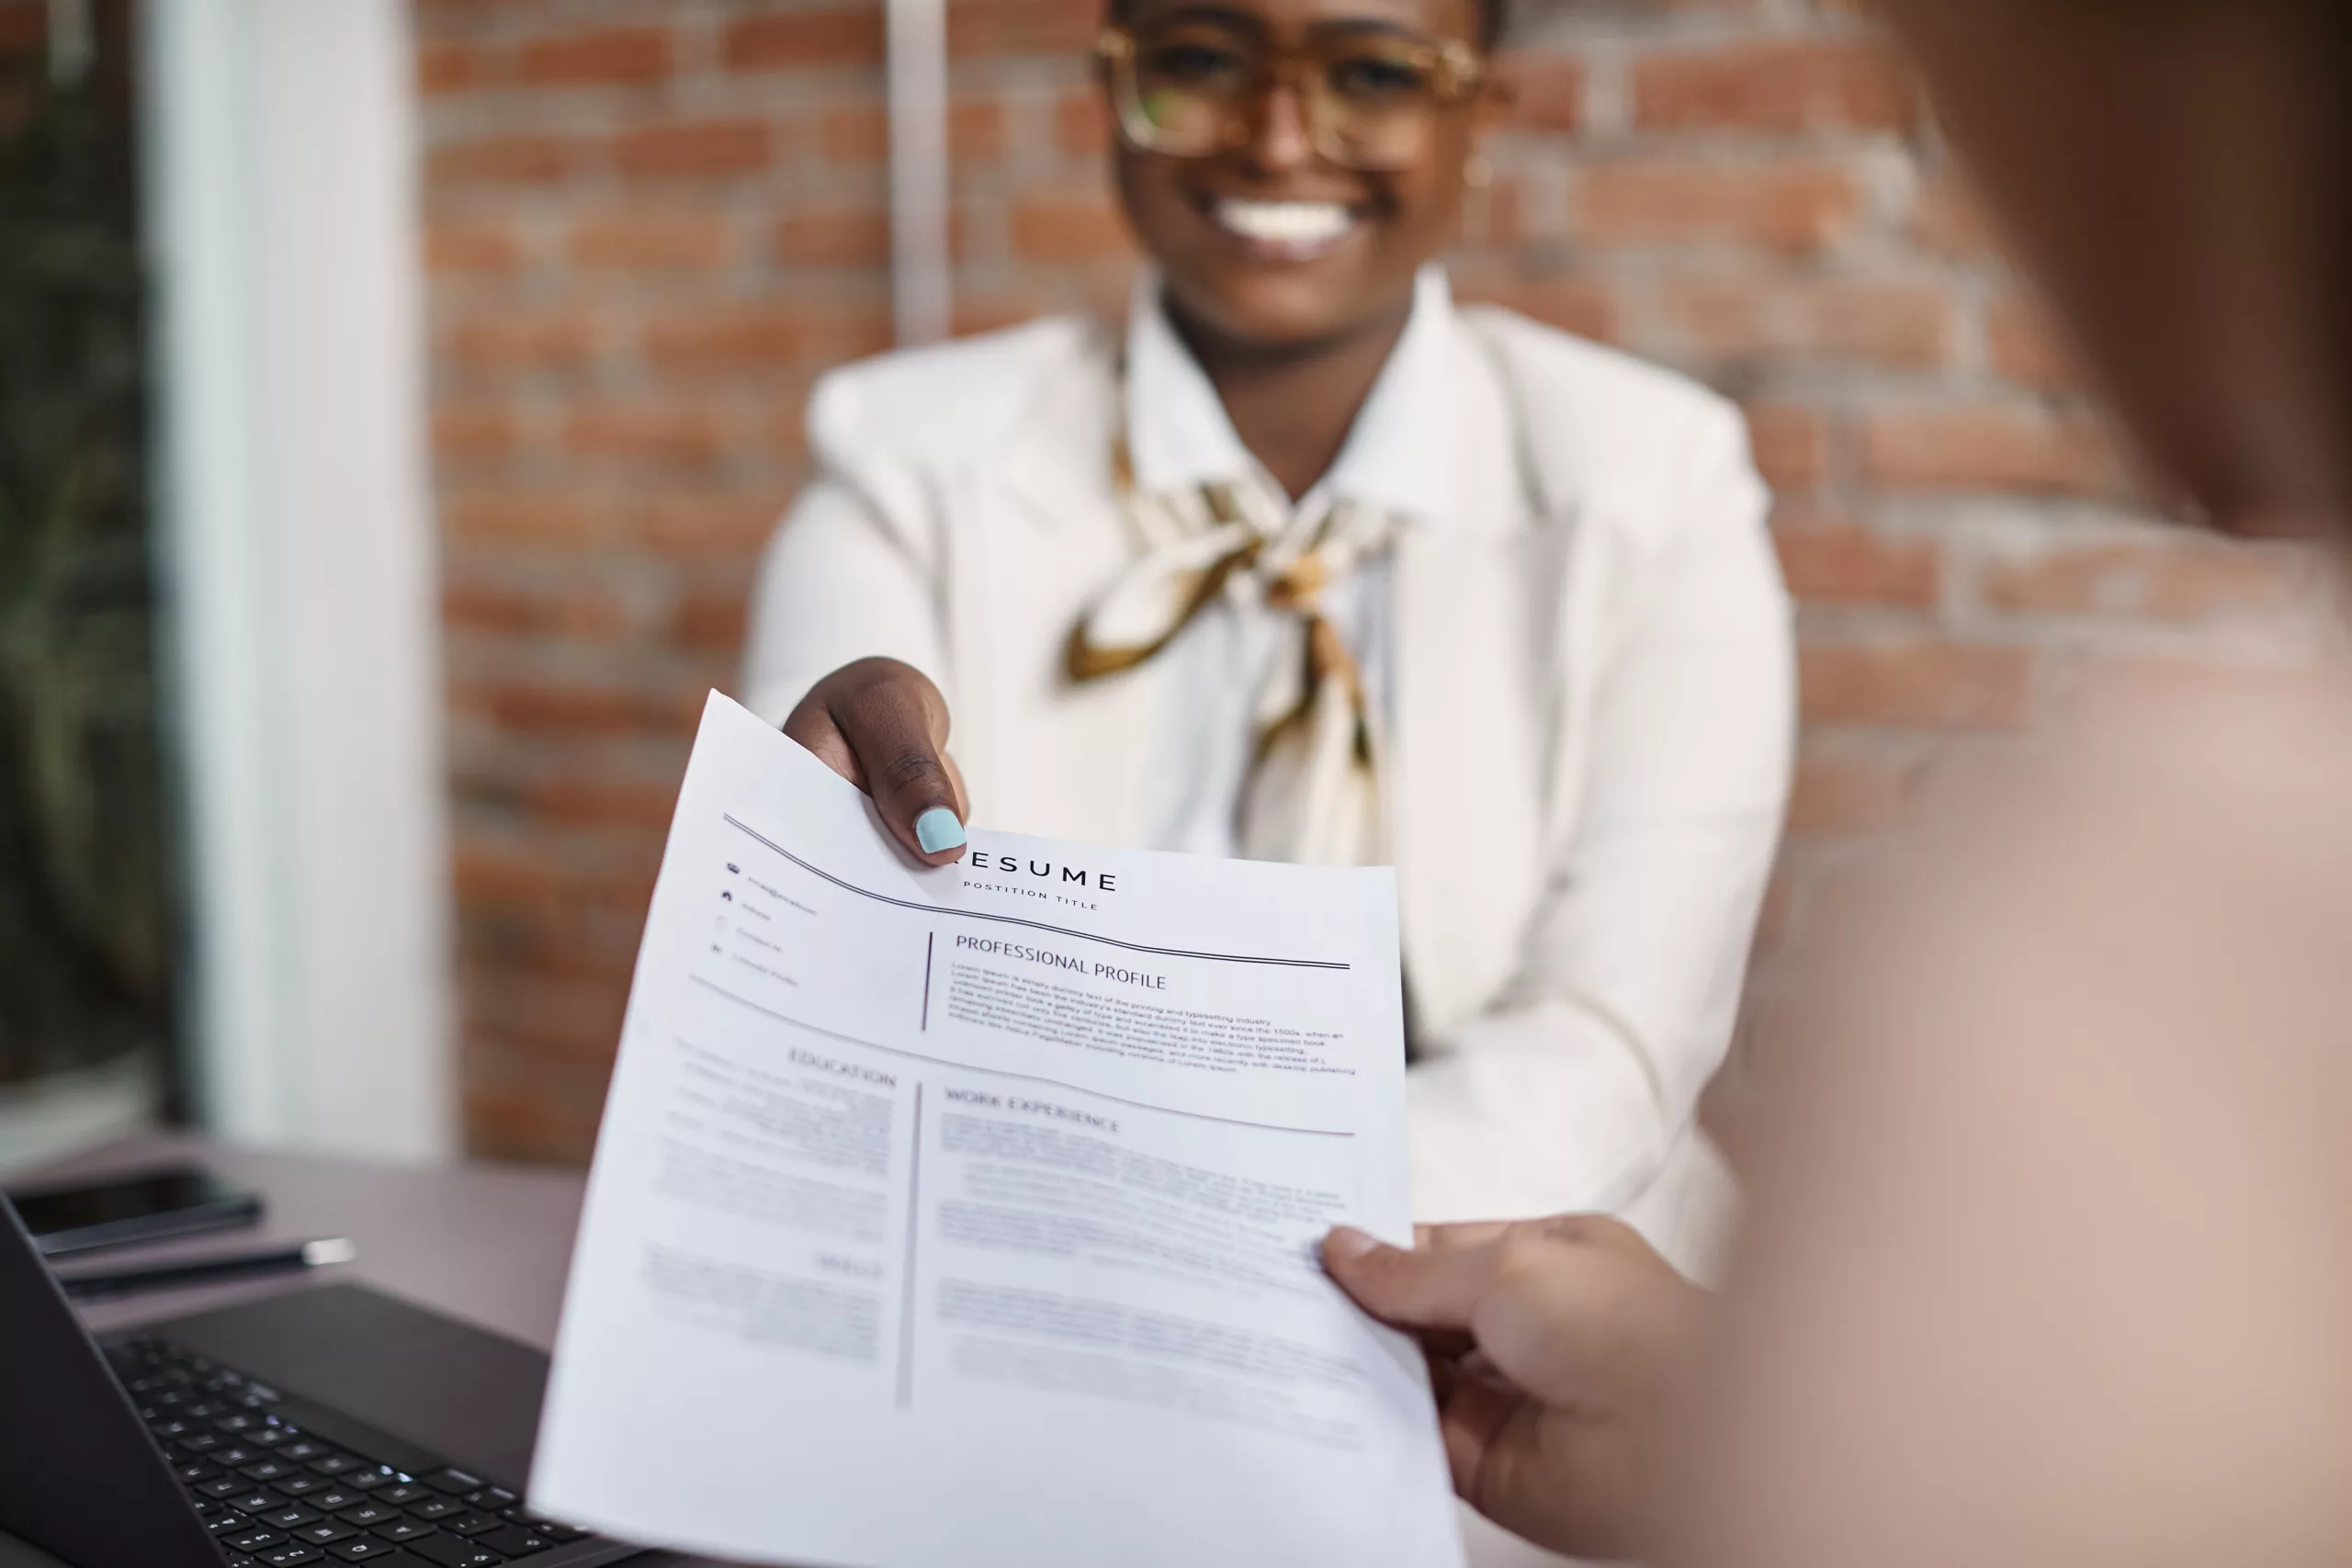 Woman professional handing a resume in a professional format to her interviewer in a modern office